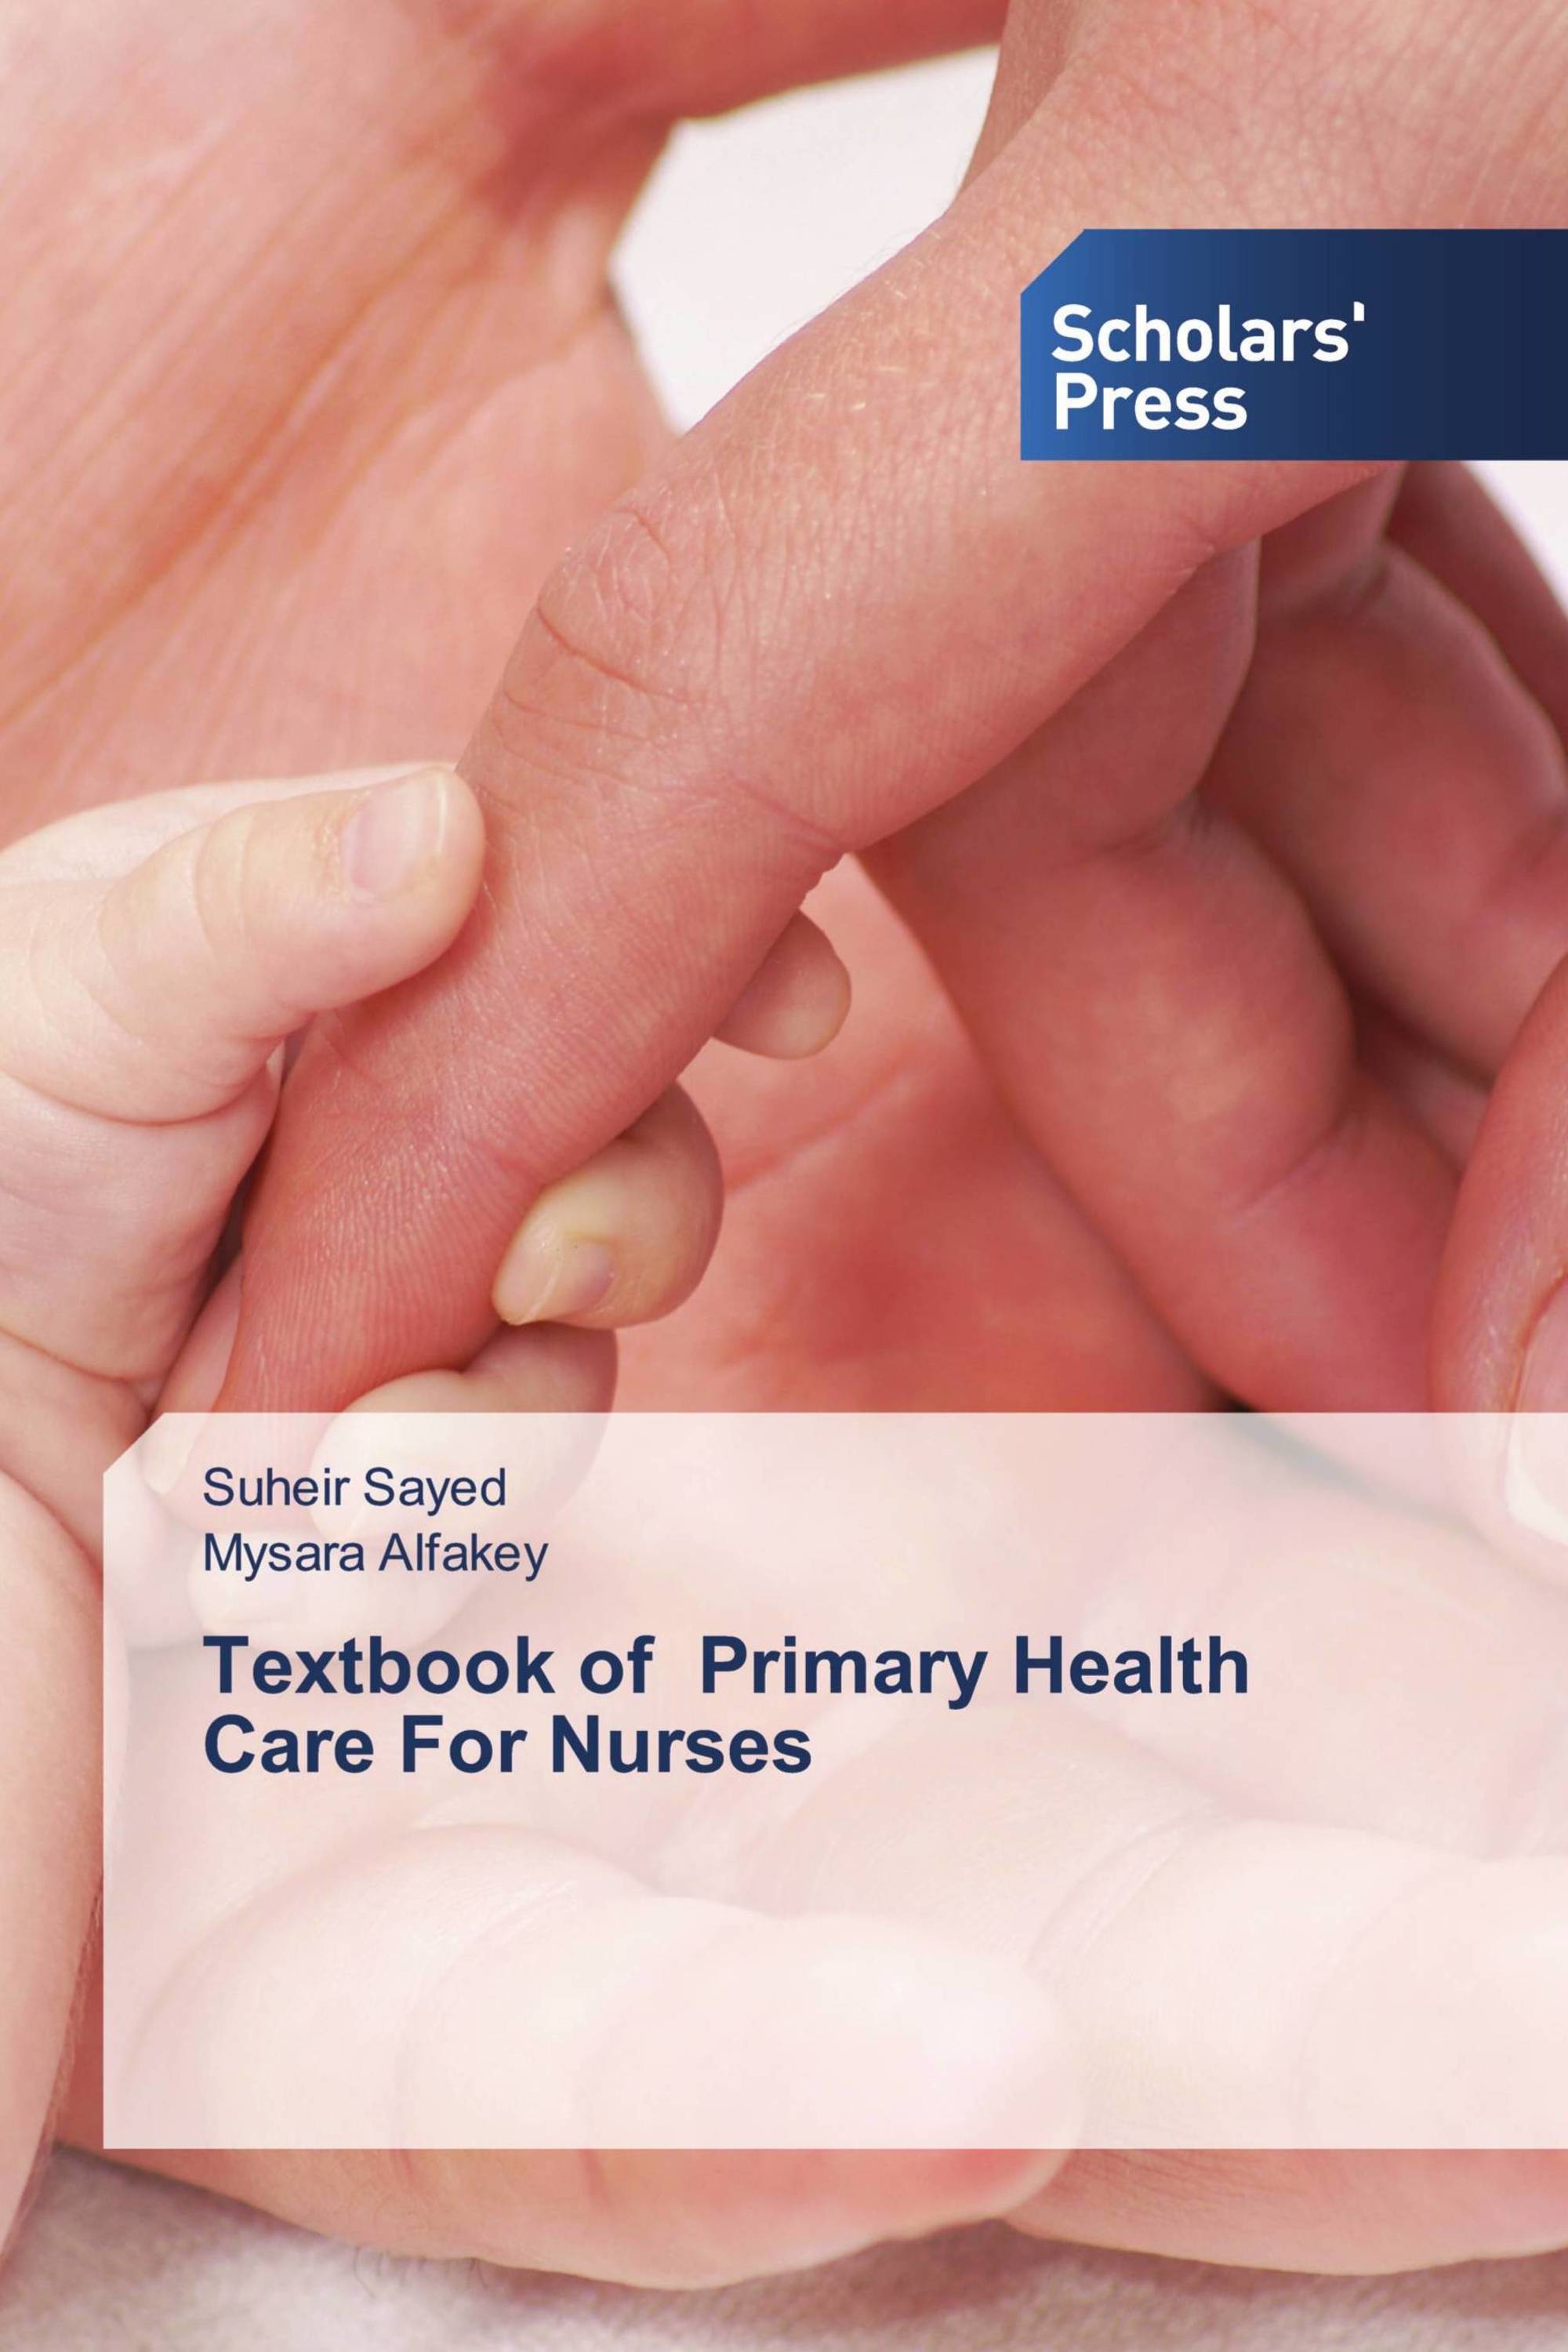 research articles on primary health care